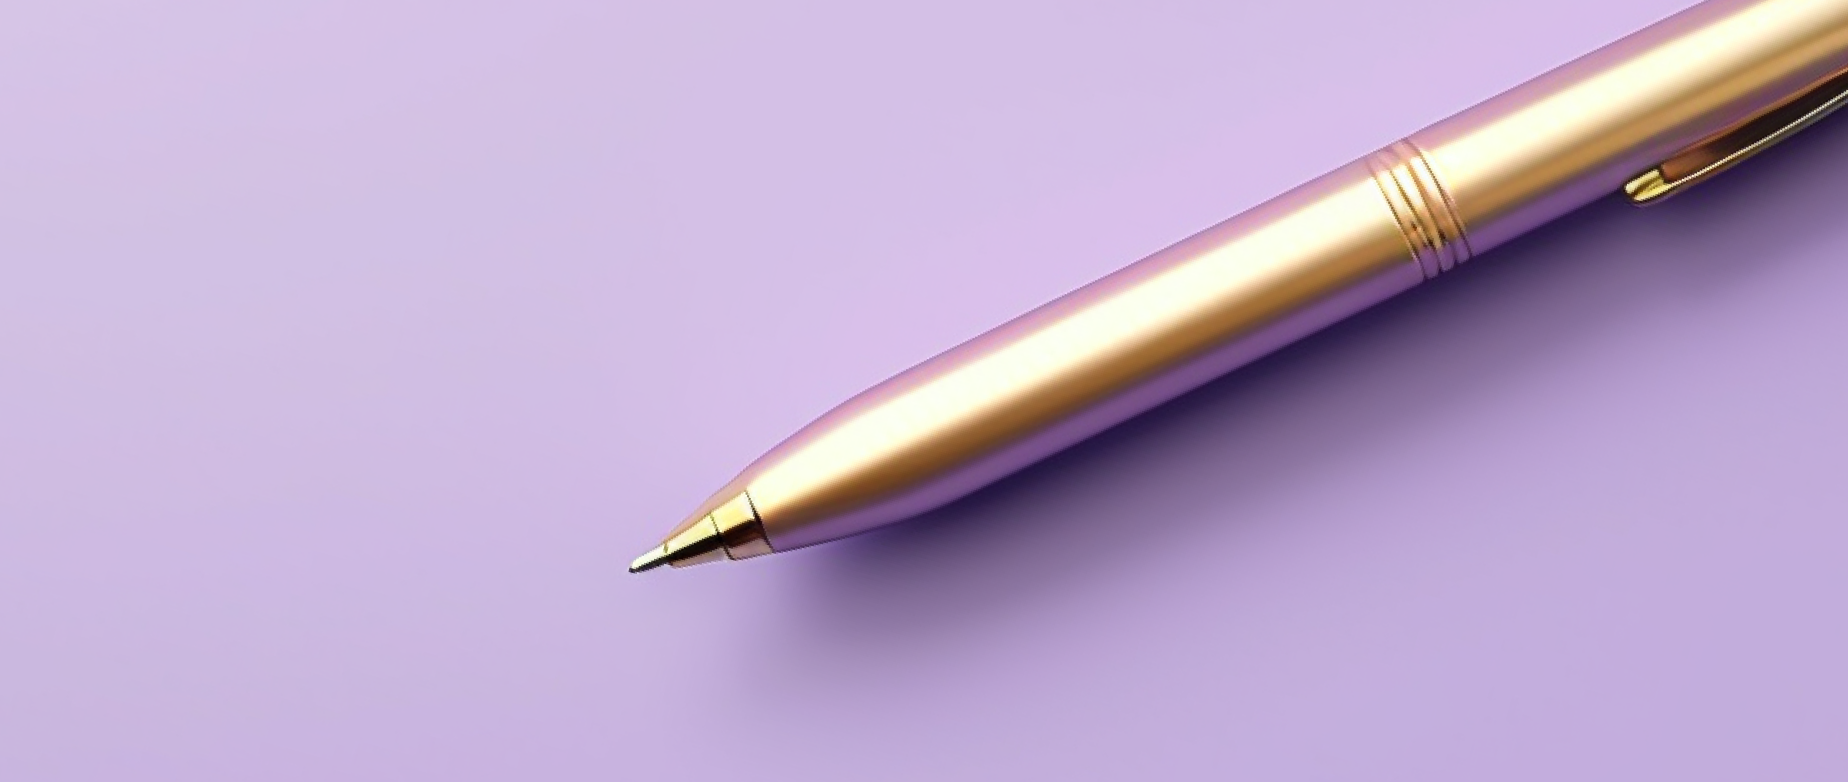 a gold pen against a purple background: how to write a professional bio